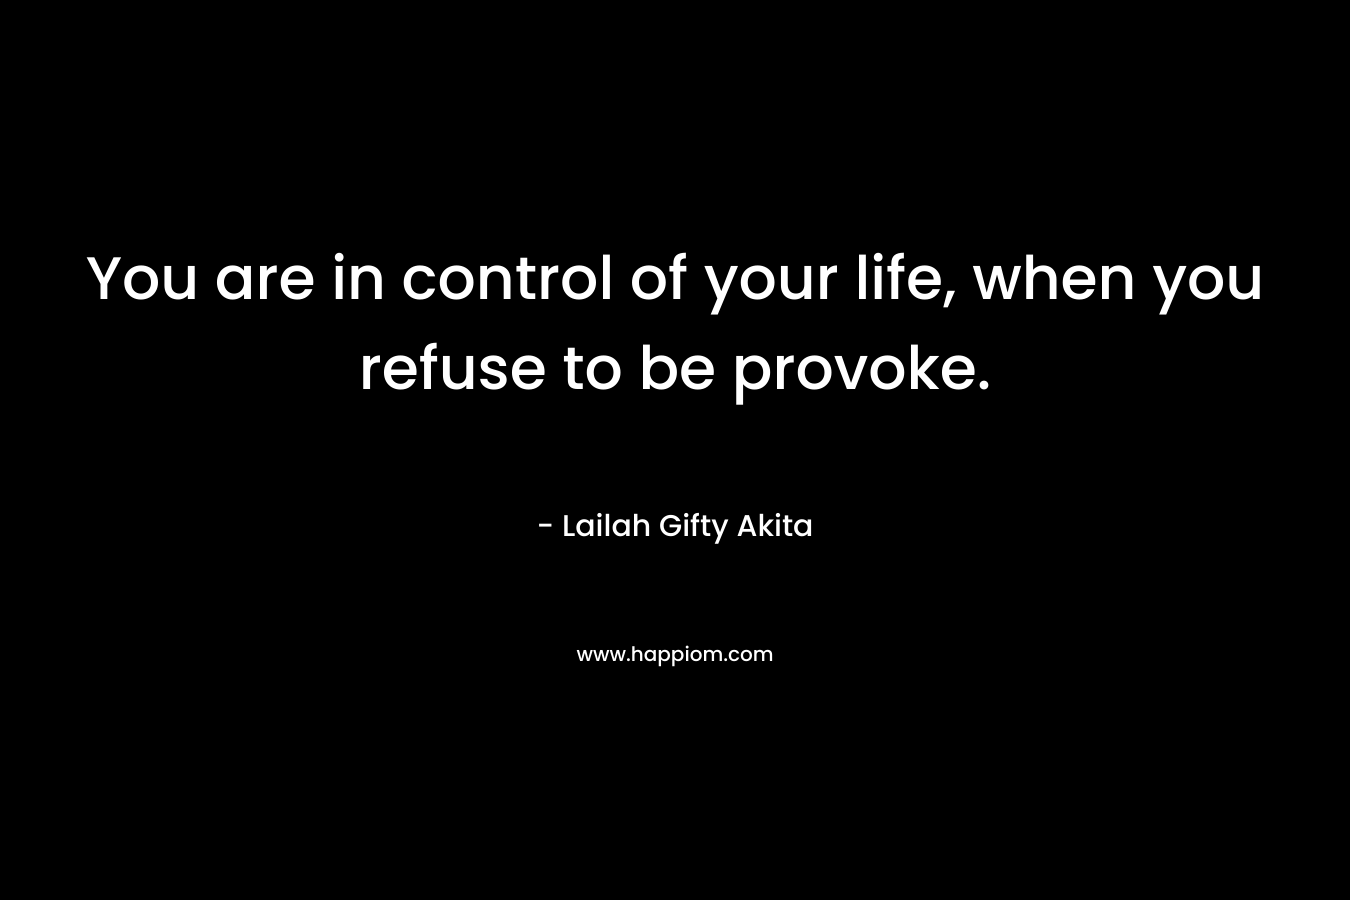 You are in control of your life, when you refuse to be provoke.